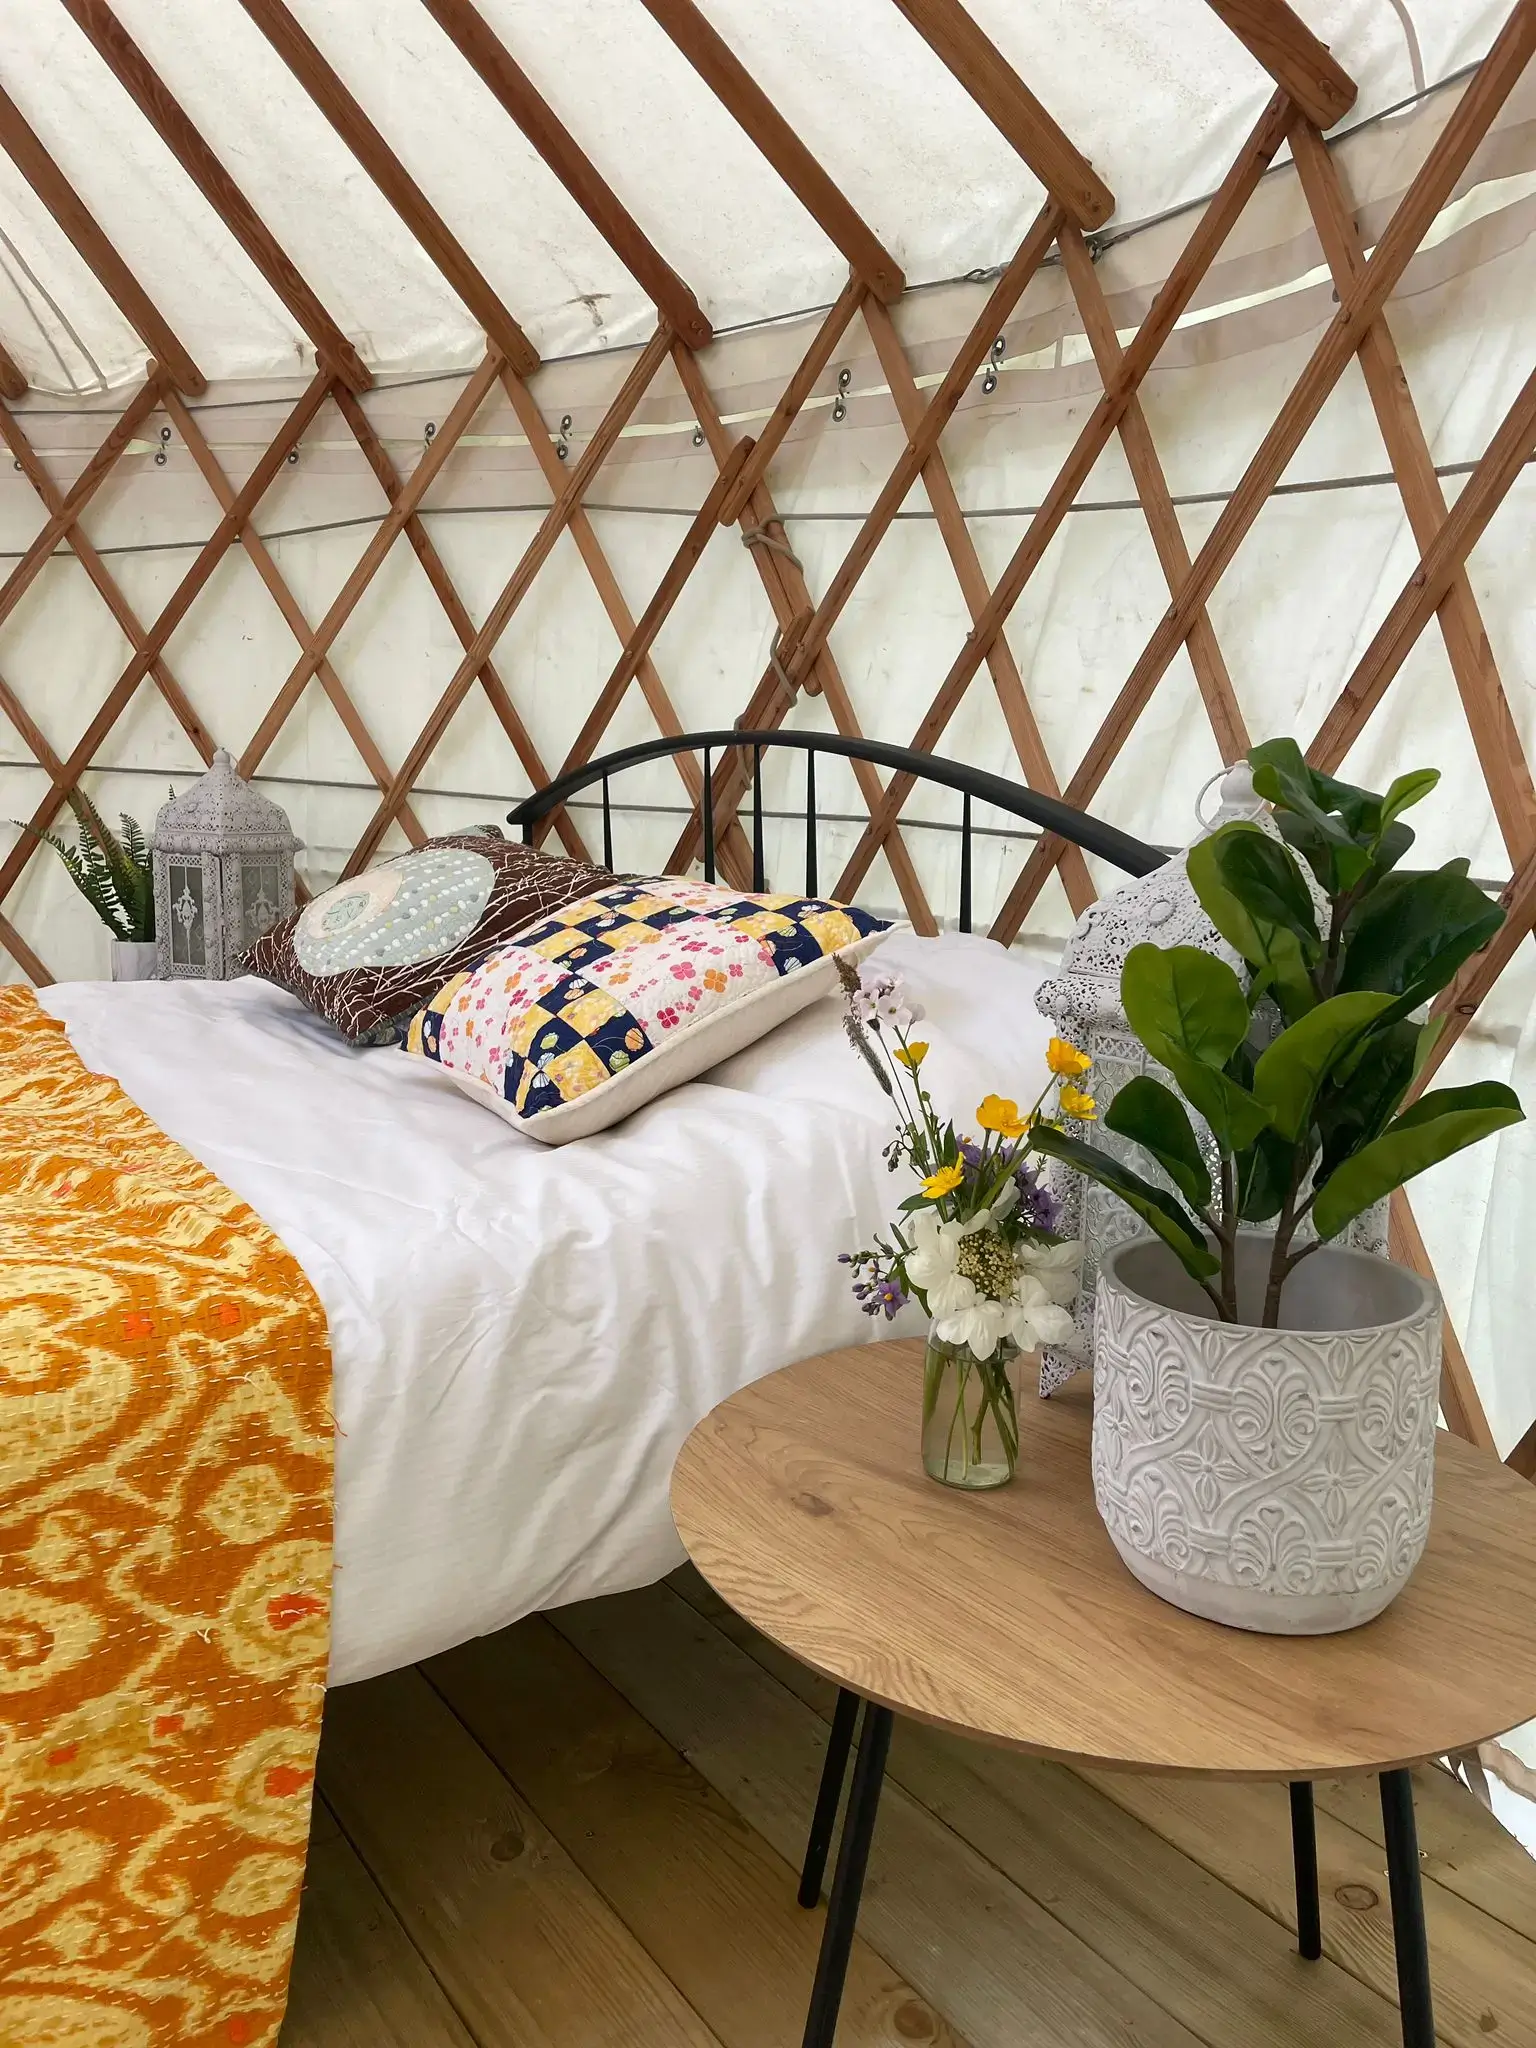 Yurt at the munny trail. Bed and side table and flower in the vase.